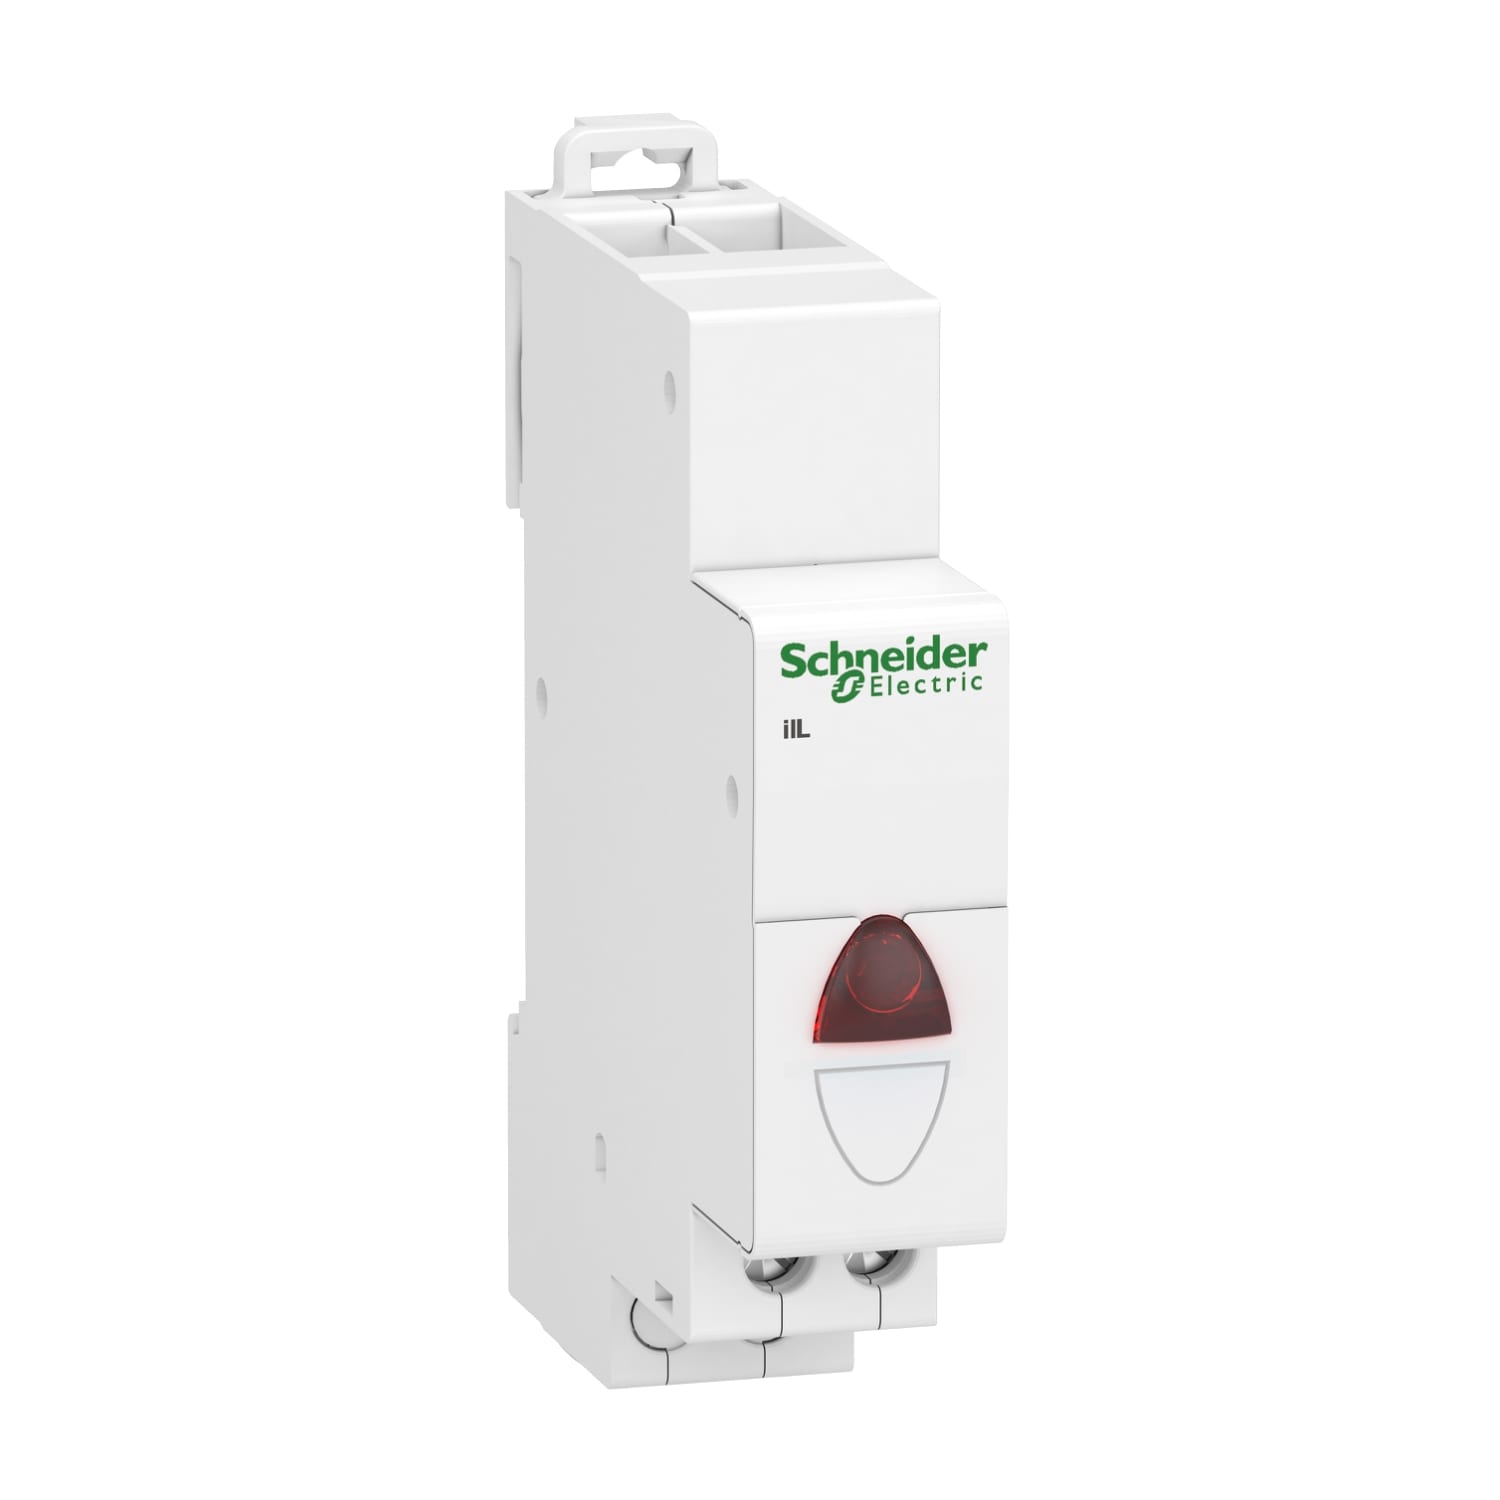 Schneider Electric - Acti9, iIL voyant lumineux simple rouge 110...230VCA